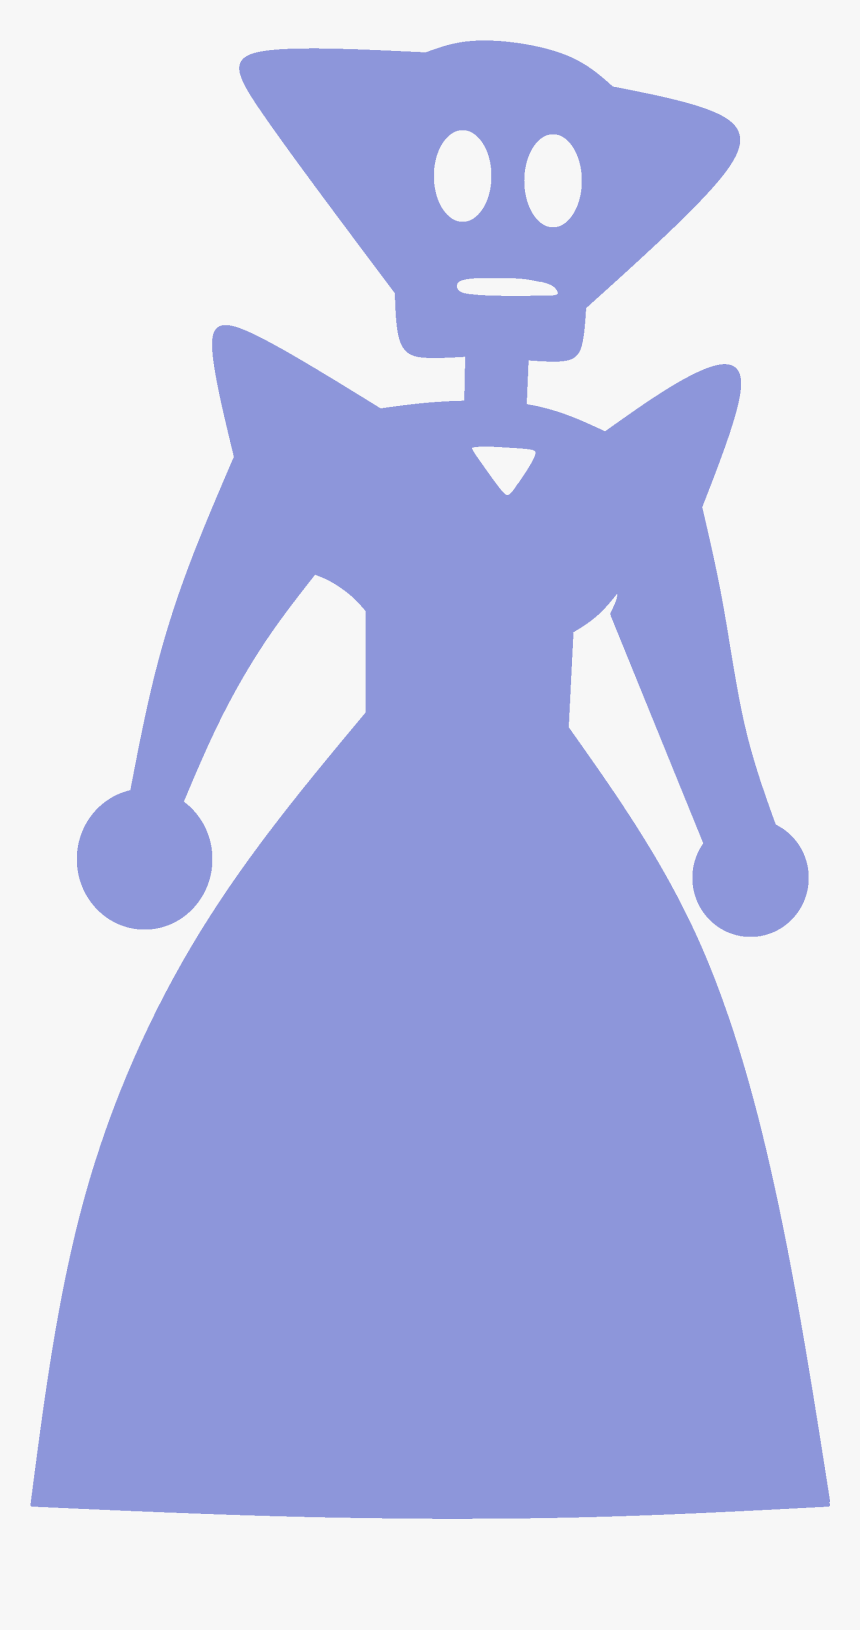 She Wears A Floor-length, Lilac And Snow Trimmed, Tiered - Steven Universe Perla Moonstone, HD Png Download, Free Download